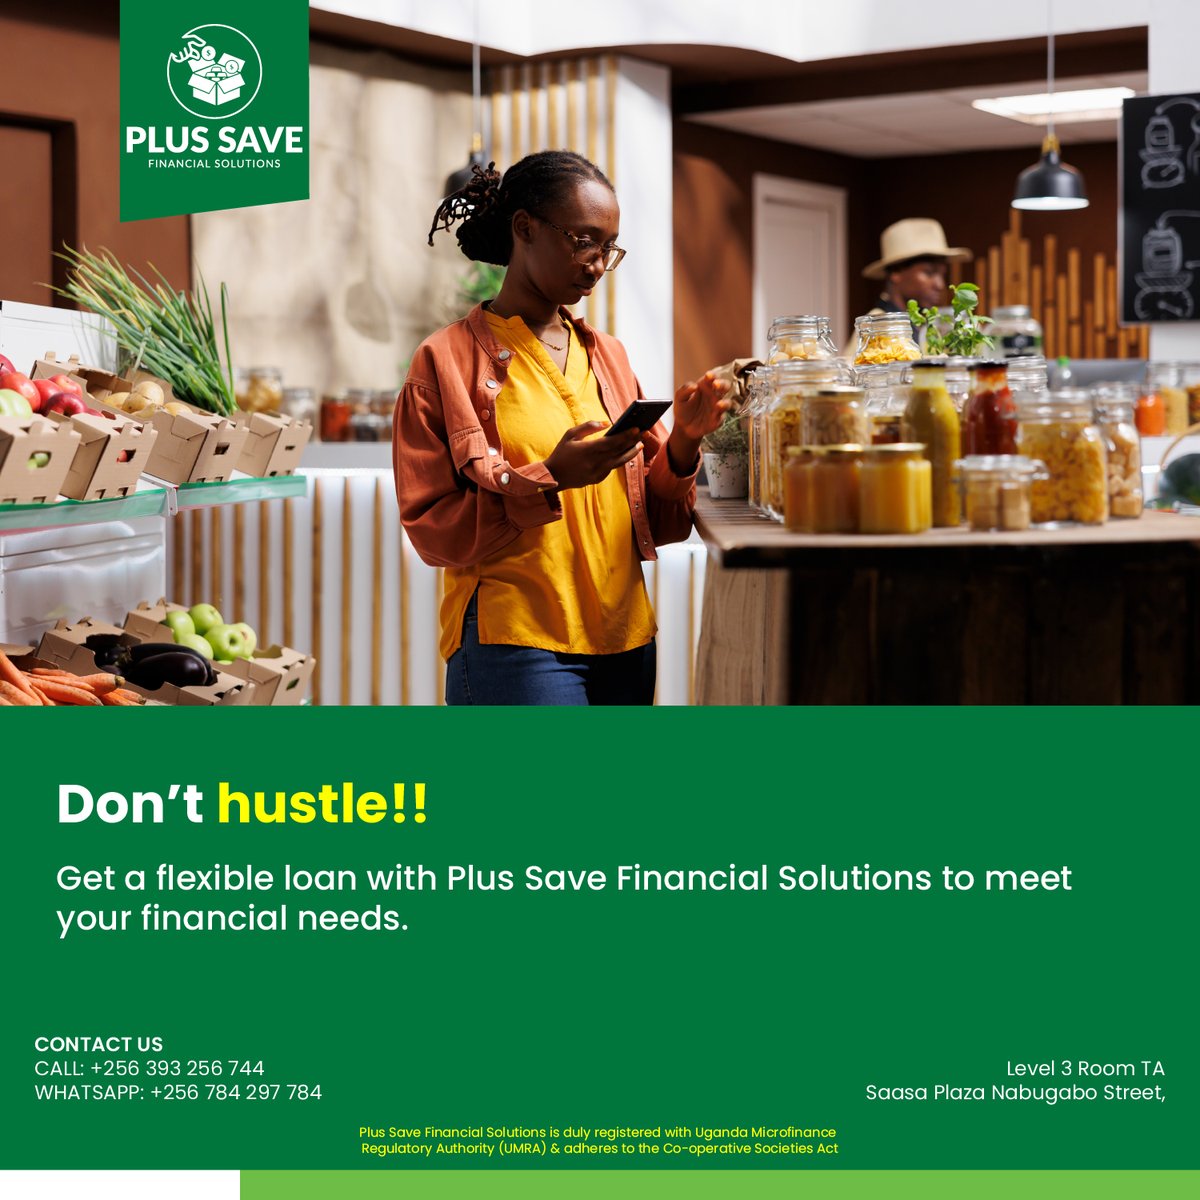 Ease your financial worries with Plus Save Financial Solutions! Say goodbye to the hustle and hello to flexible loans tailored to your needs. Let us help you achieve your goals without the stress. 💼💰 

#FinancialFreedom #FlexibleLoans #PlusSave